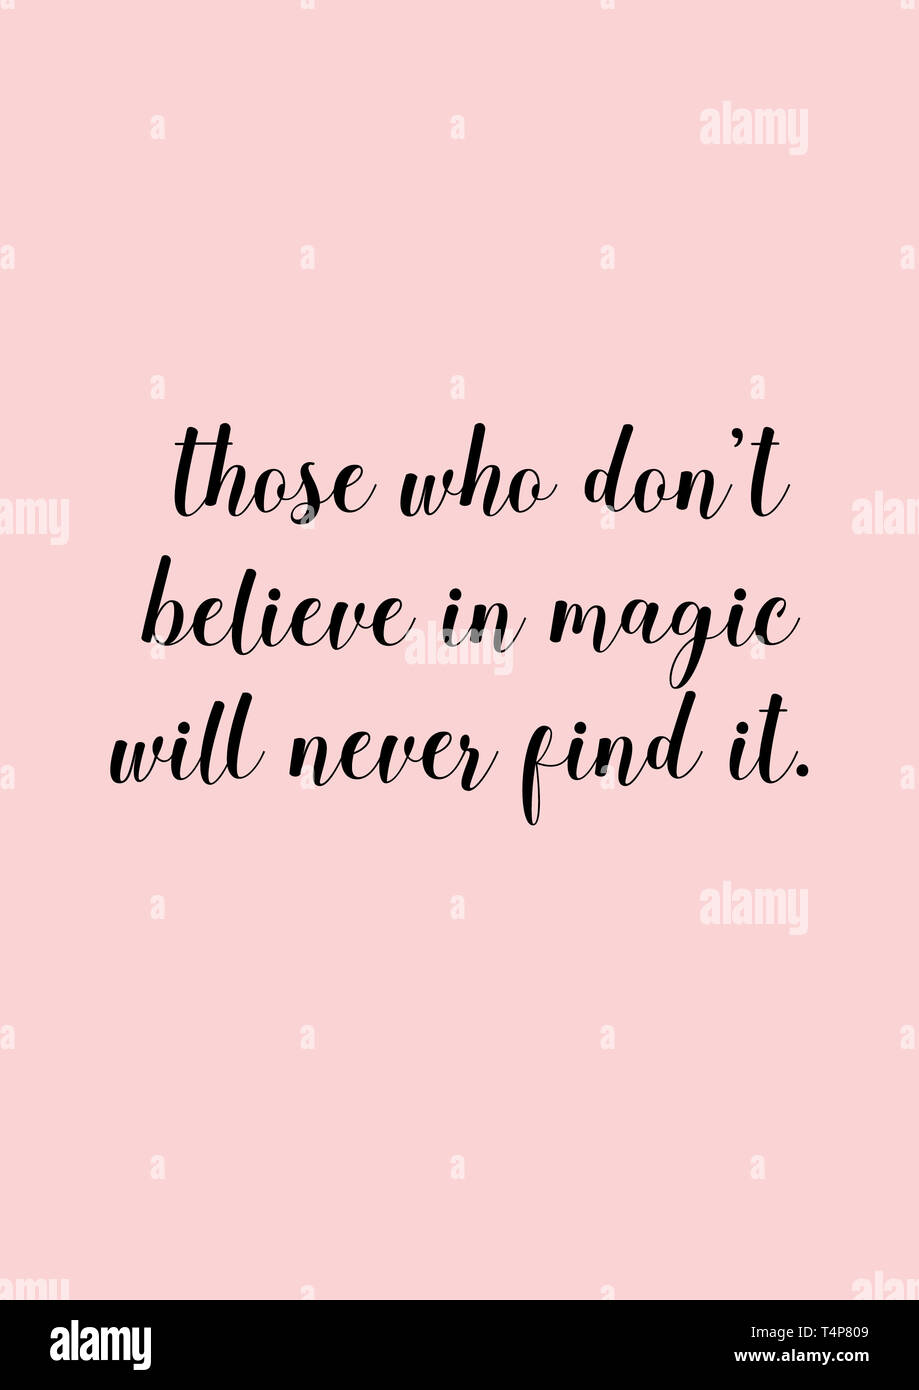 Those who don't believe in magic will never find it. Cute inspirational quote hand lettering with pink background. Stock Photo